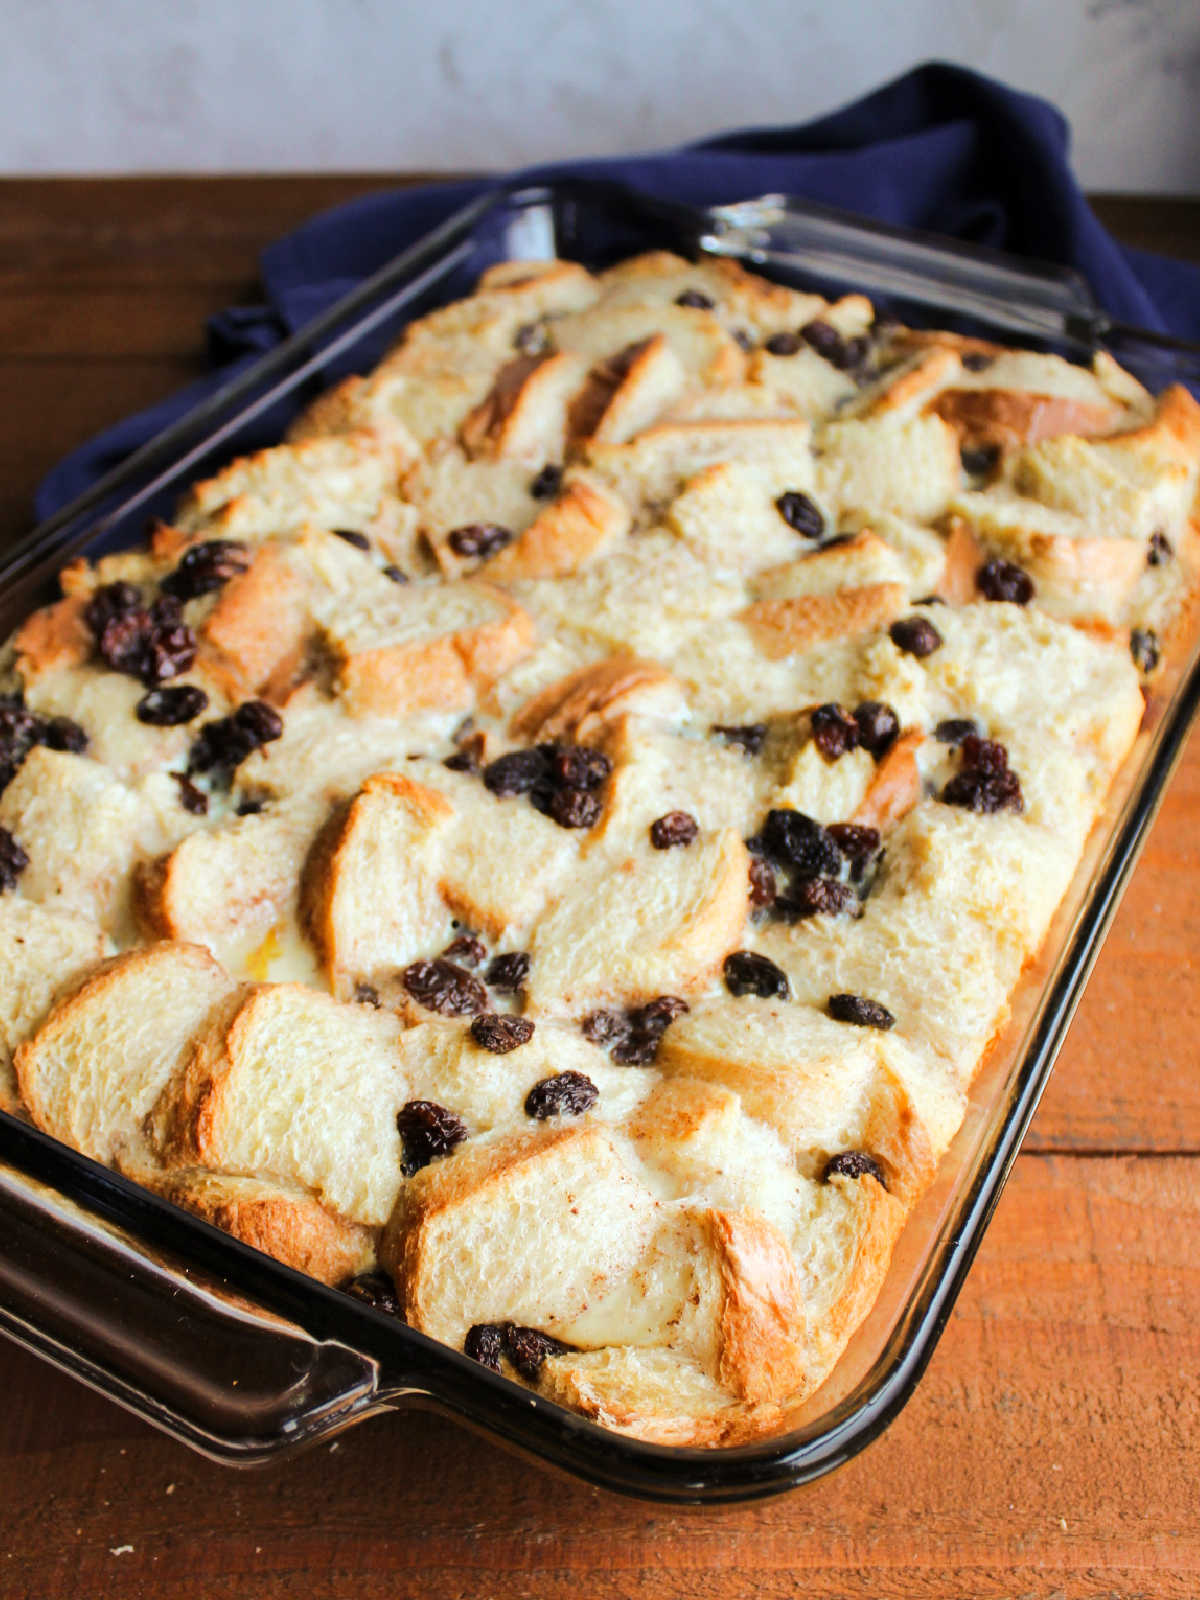 Baked condensed milk bread pudding showing how it puffed up and the top got golden in the oven.